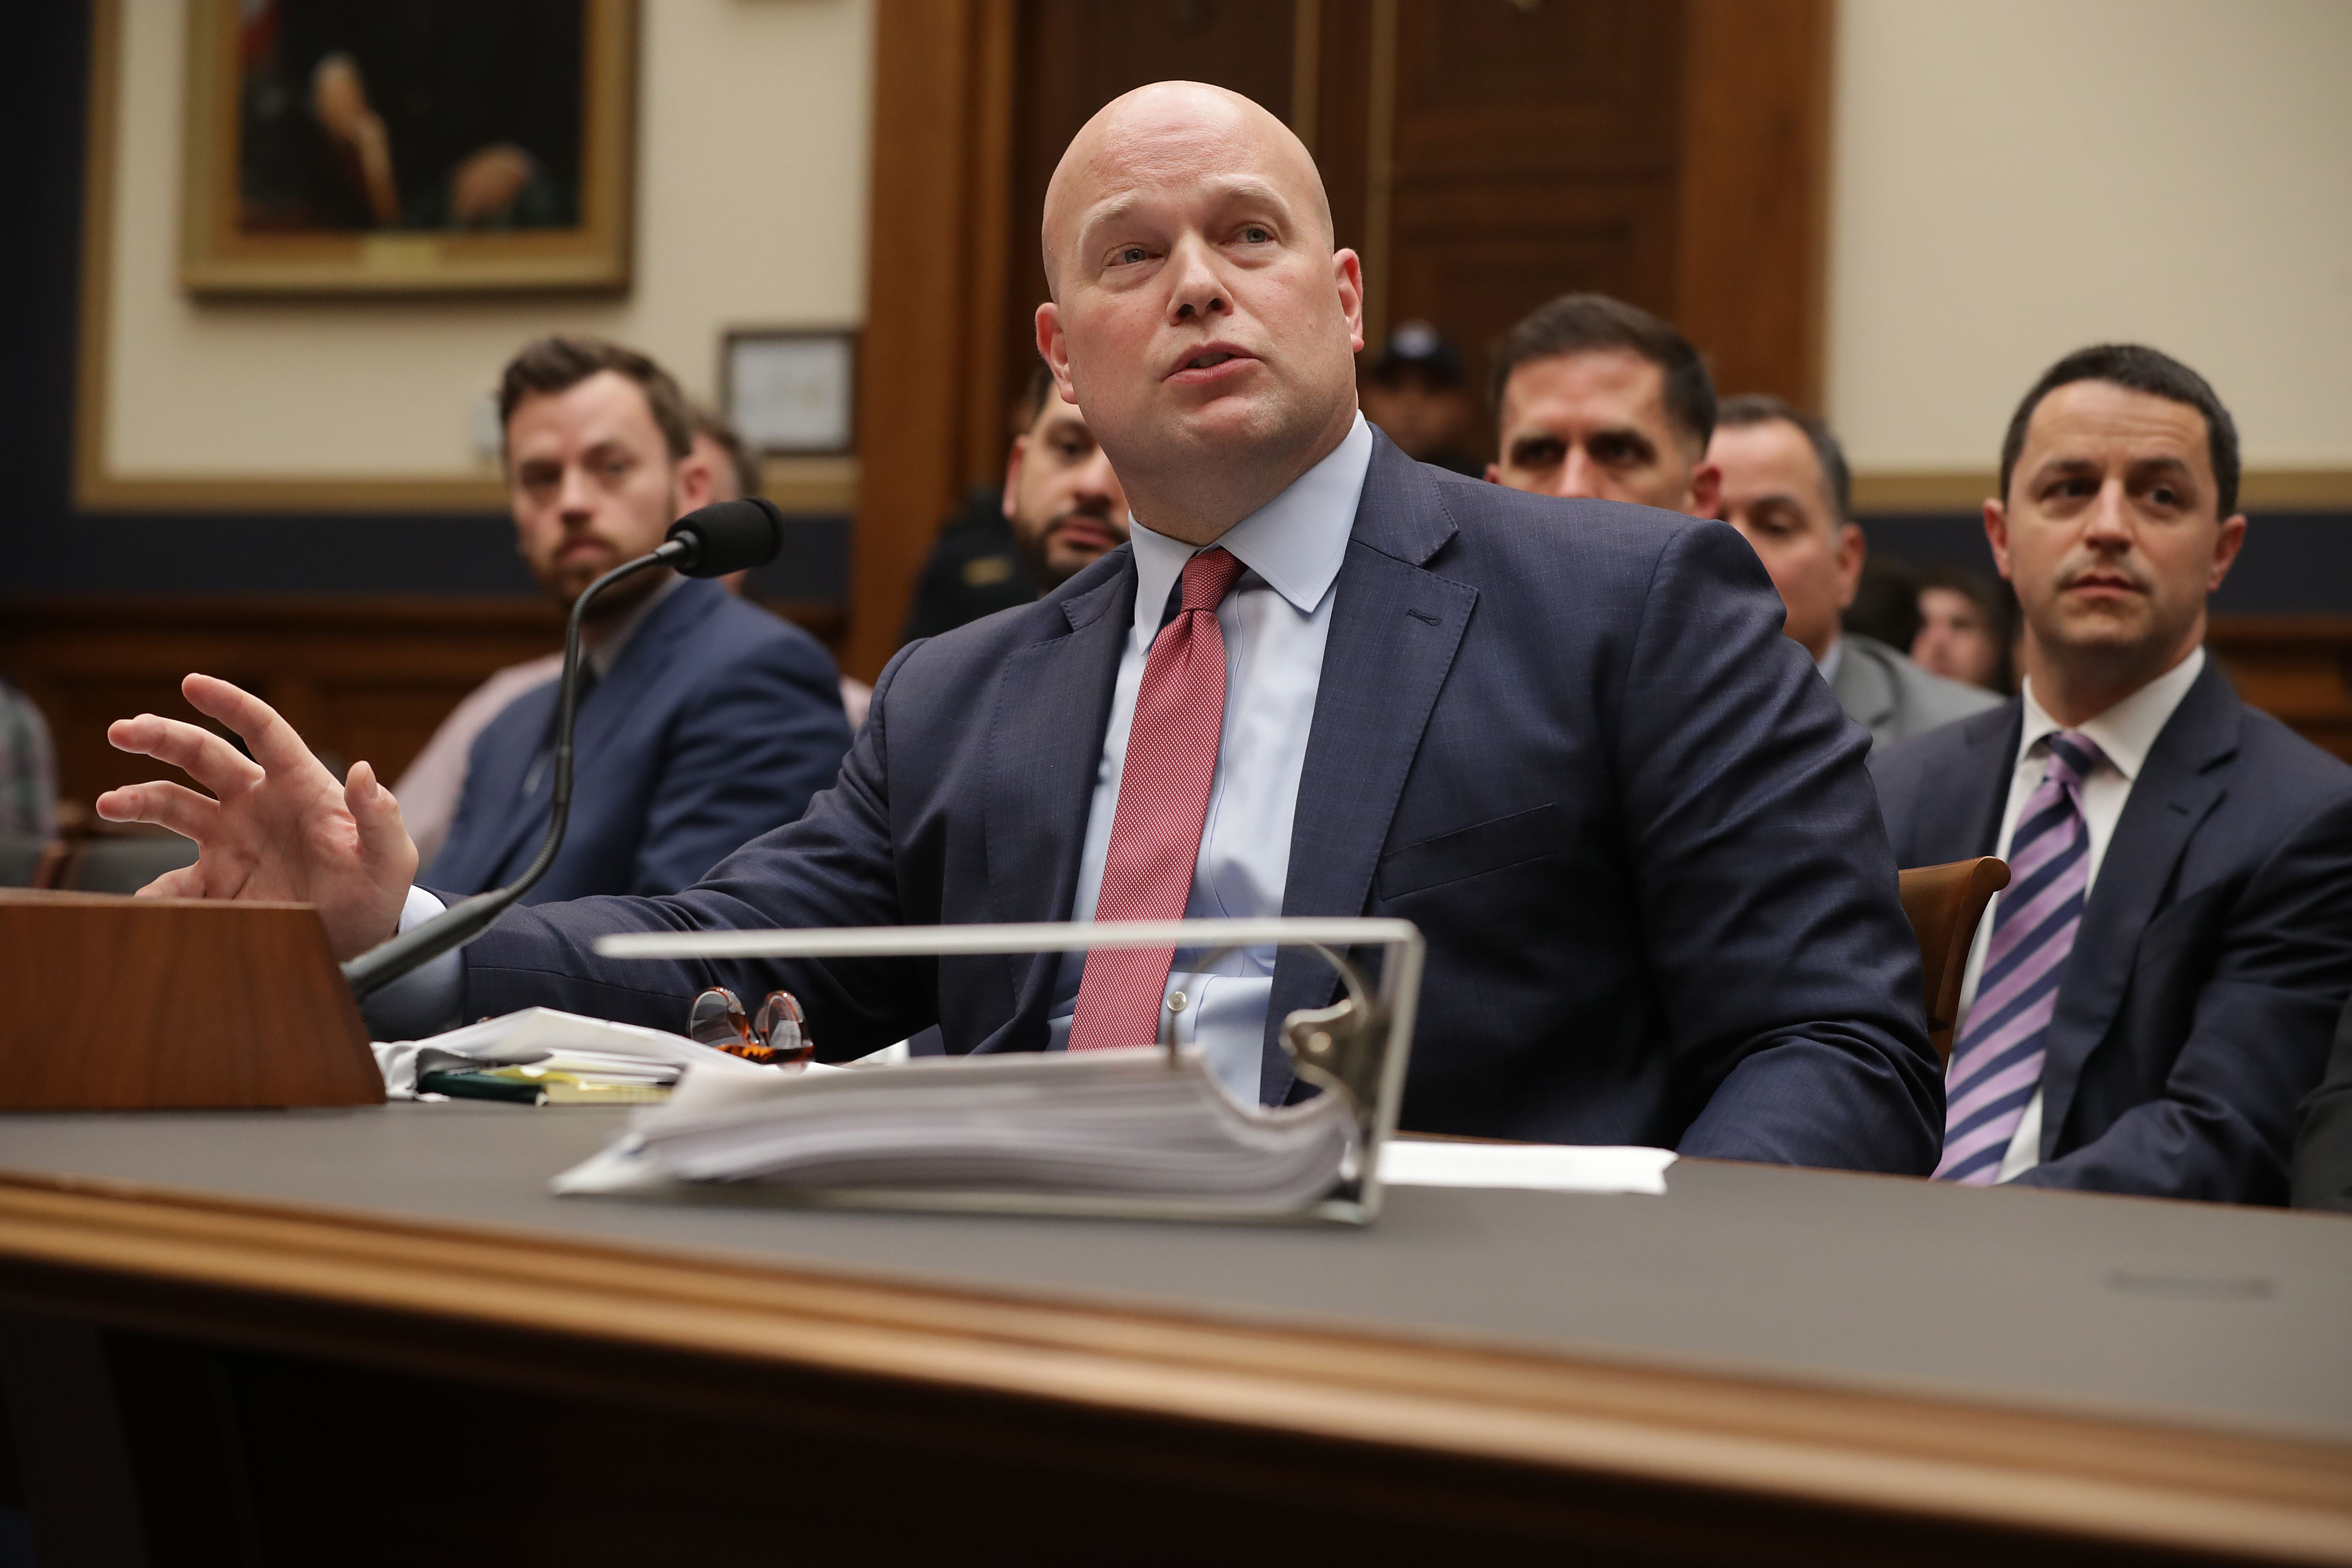 Acting U.S. Attorney General Matthew Whitaker testifies before the House Judiciary Committee in the Rayburn House Office Building on Capitol Hill February 08, 2019 in Washington, DC. (Photo by Chip Somodevilla/Getty Images)